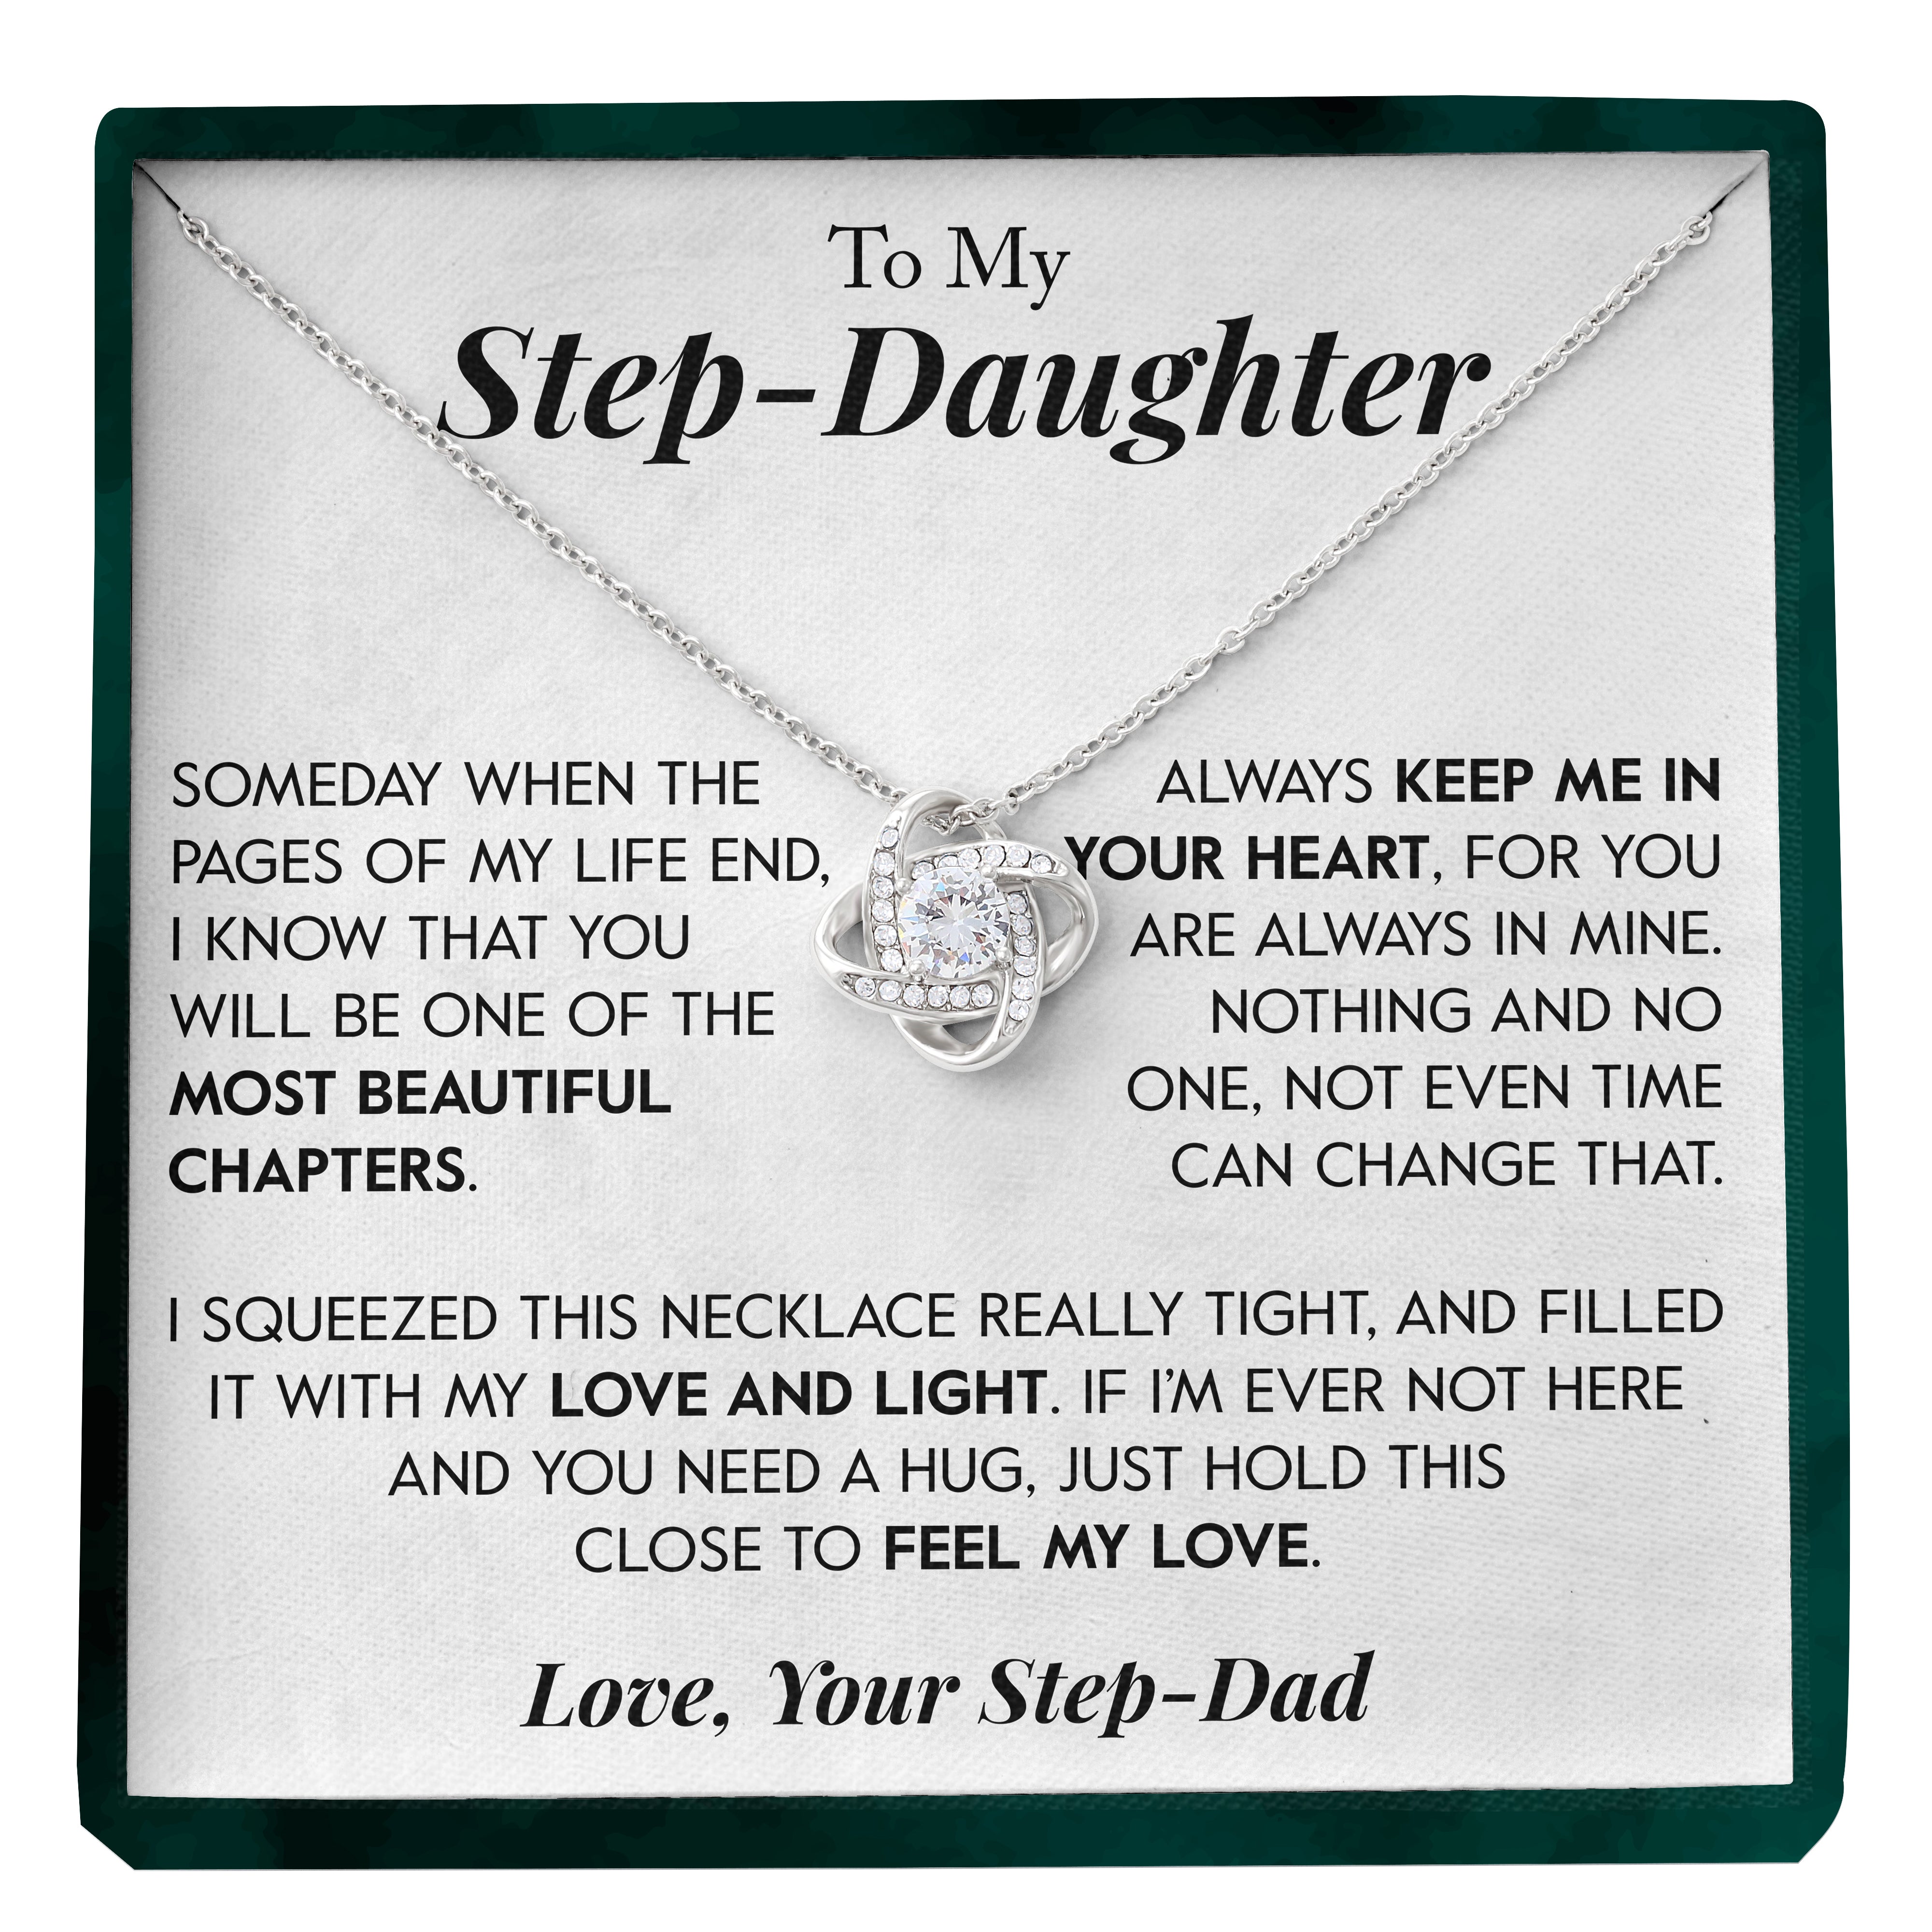 To My Step-Daughter | "Pages of my Life" | Love Knot Necklace